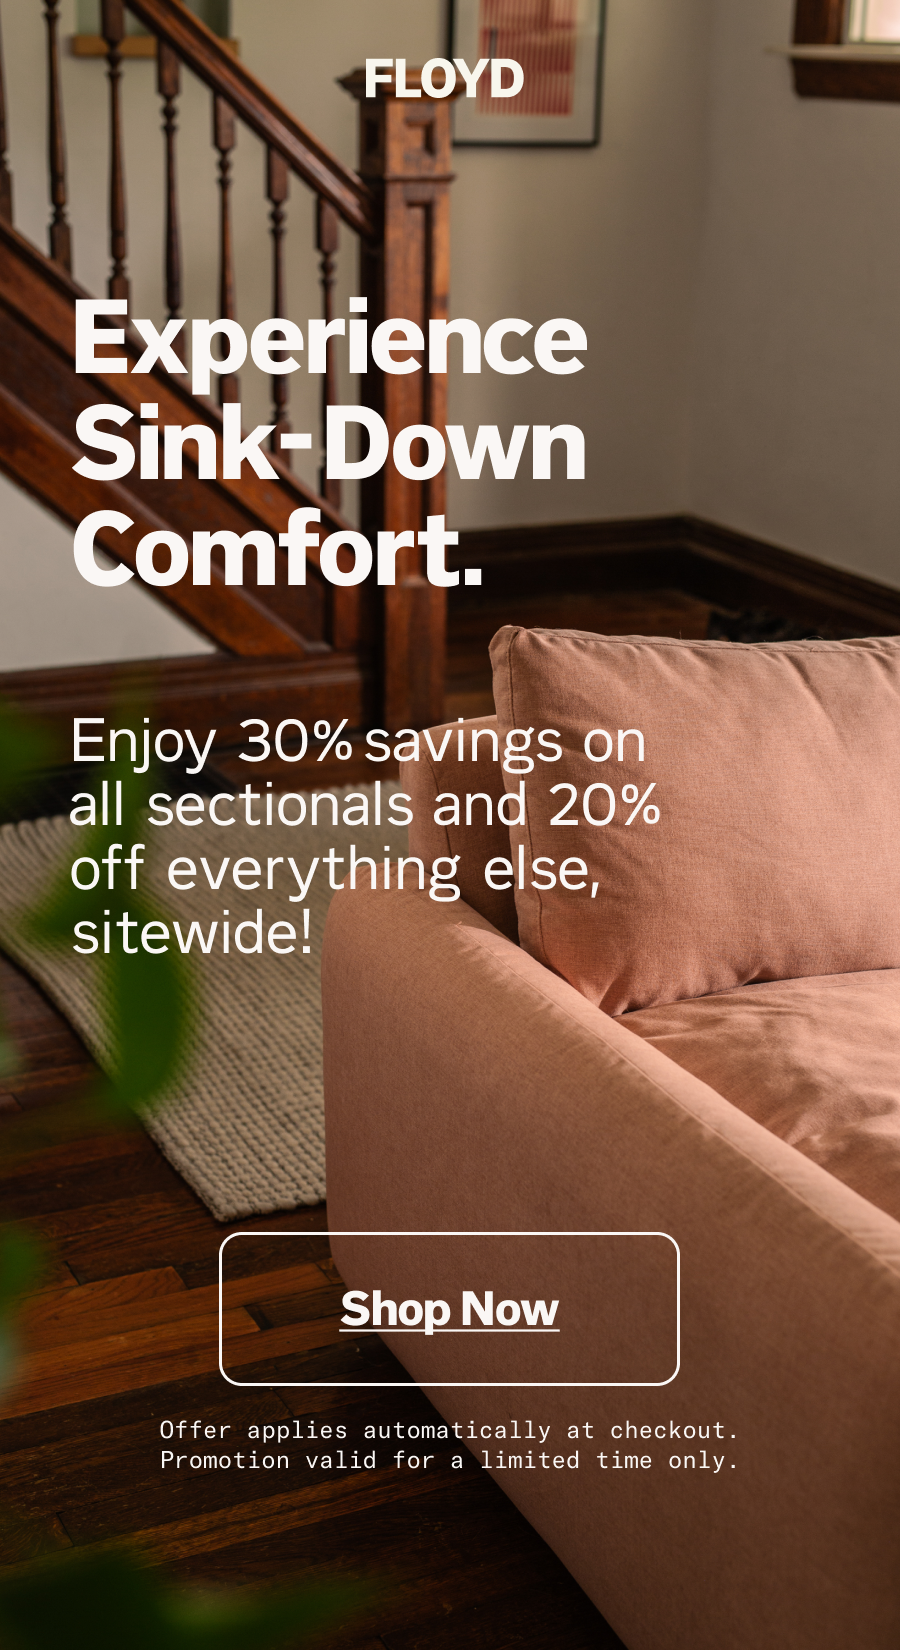 Experience Sink-Down Comfort. Enjoy 30% savings on all sectionals and 20% off everything else, sitewide! Shop Now.